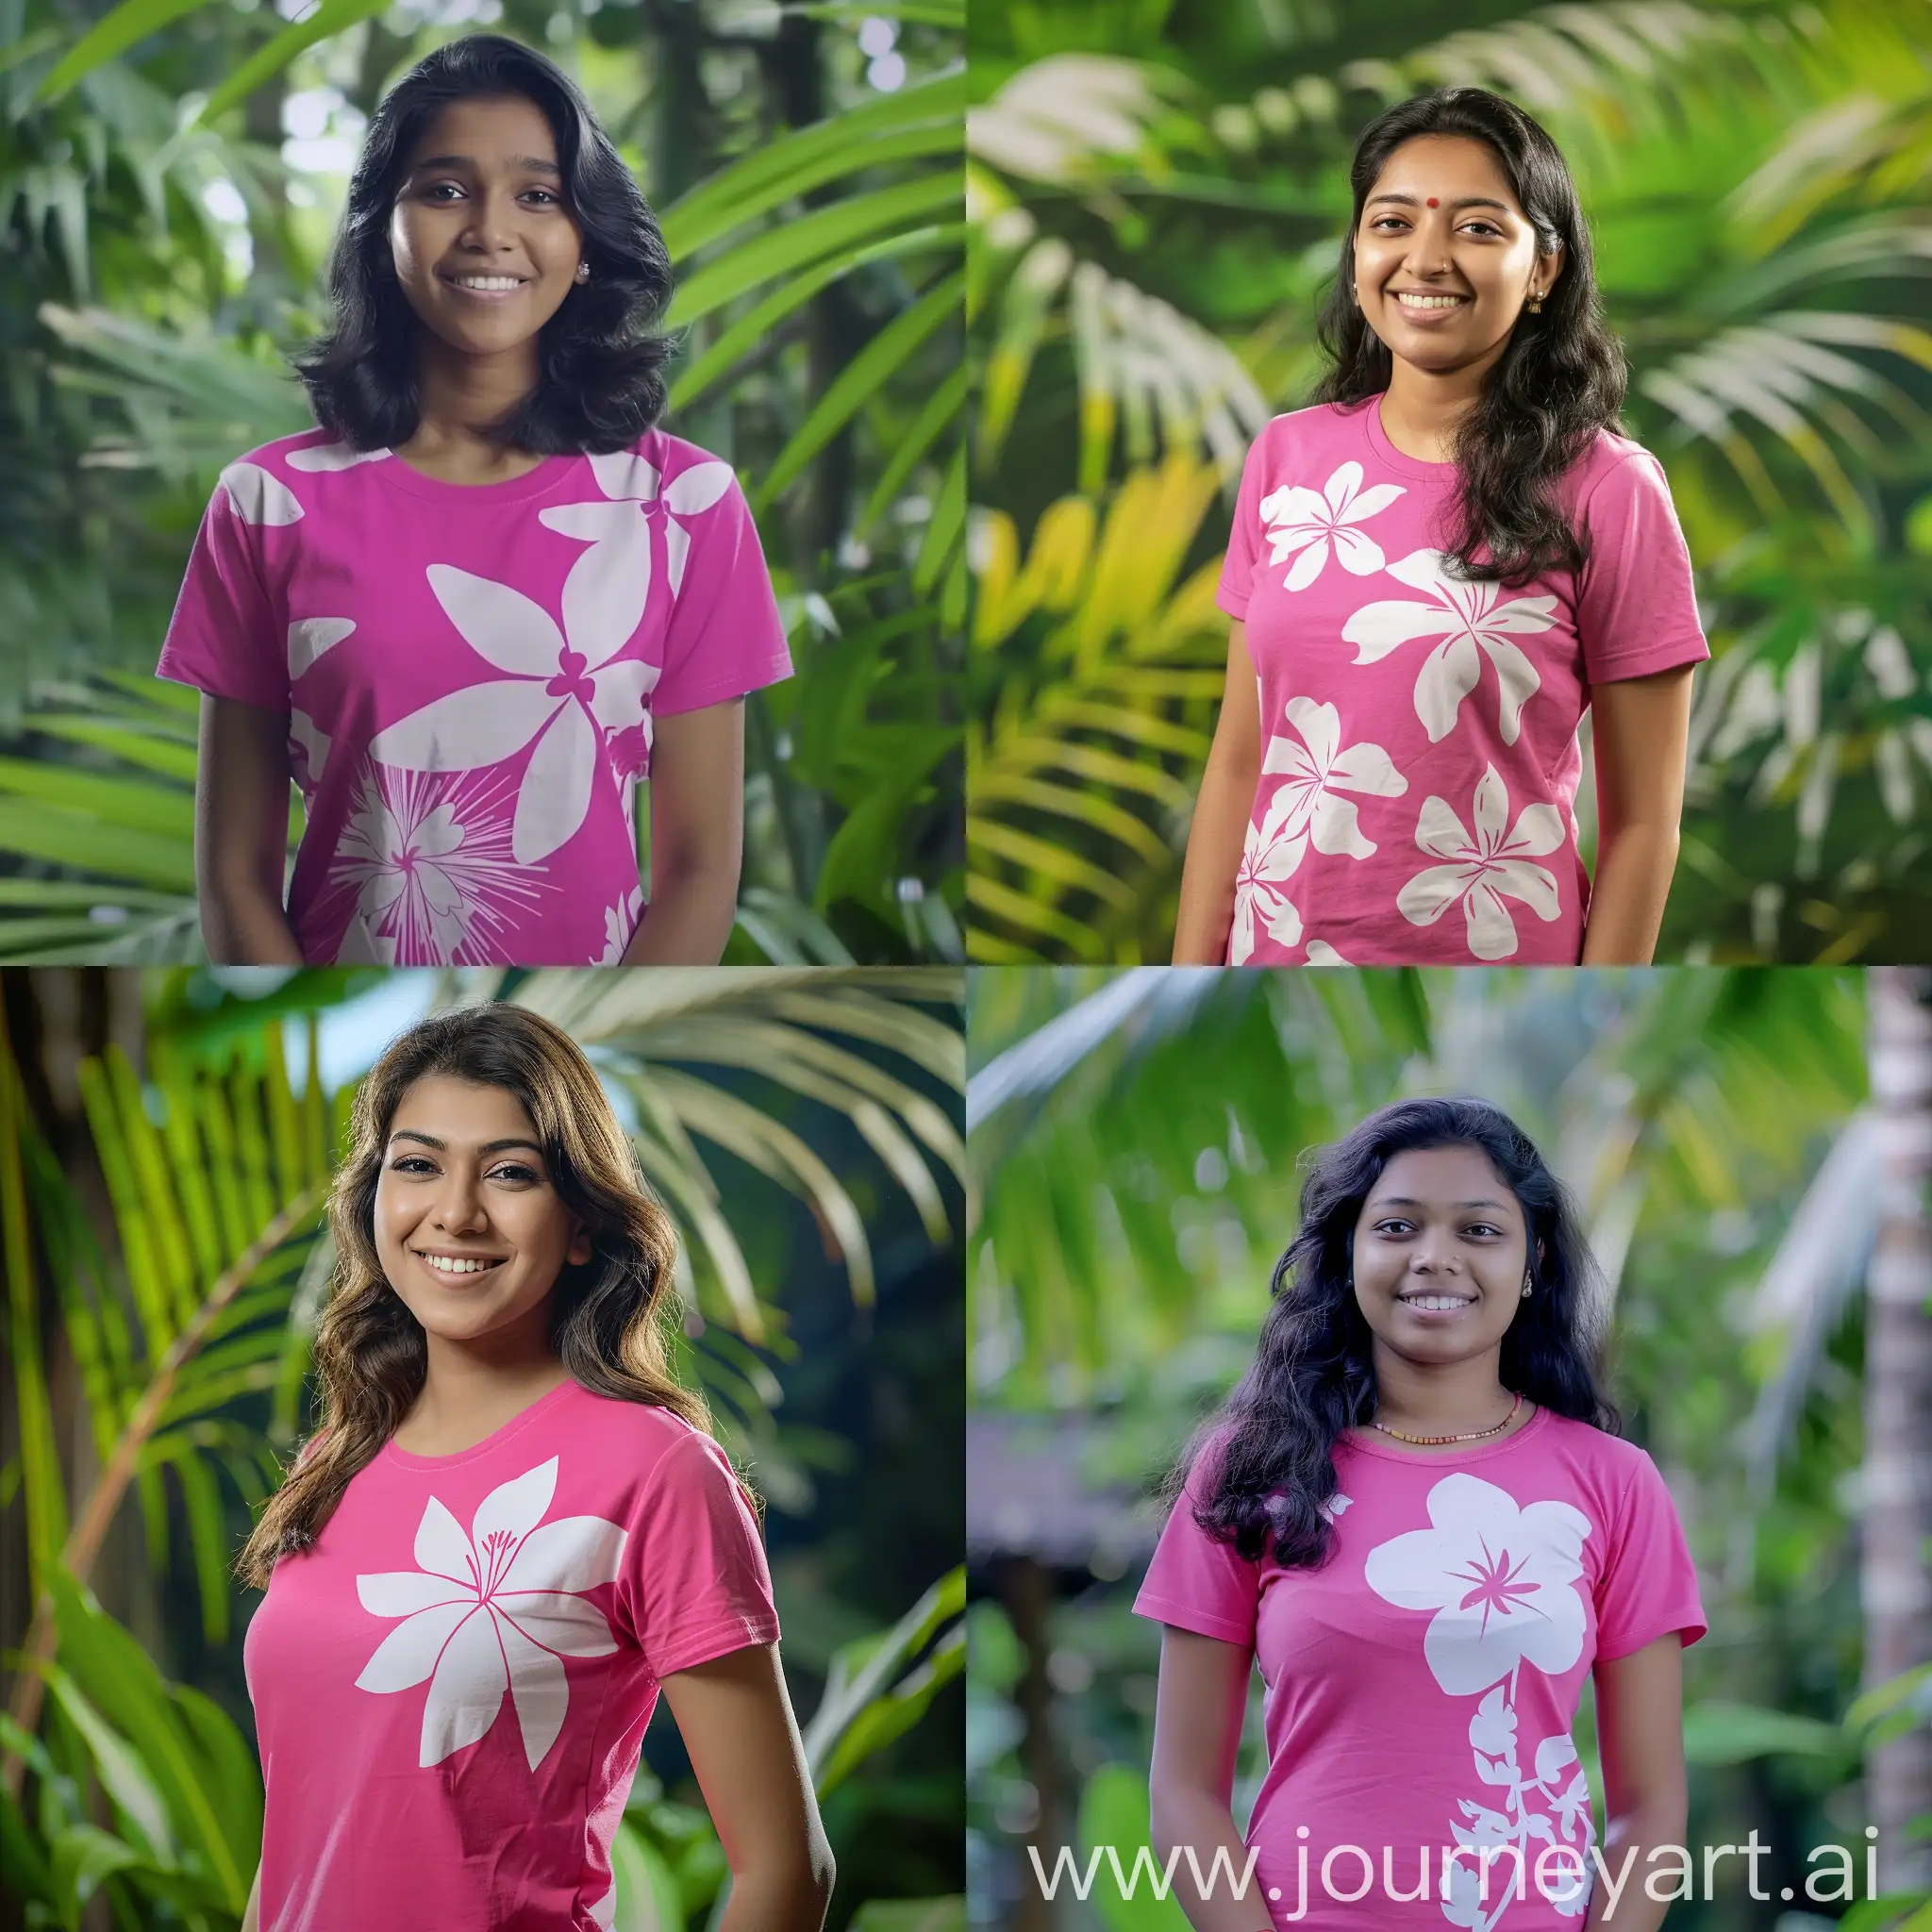 Beautiful-Malayali-Teenage-Woman-Smiling-in-Pink-and-White-Flower-TShirt-Against-Tropical-Jungle-Background